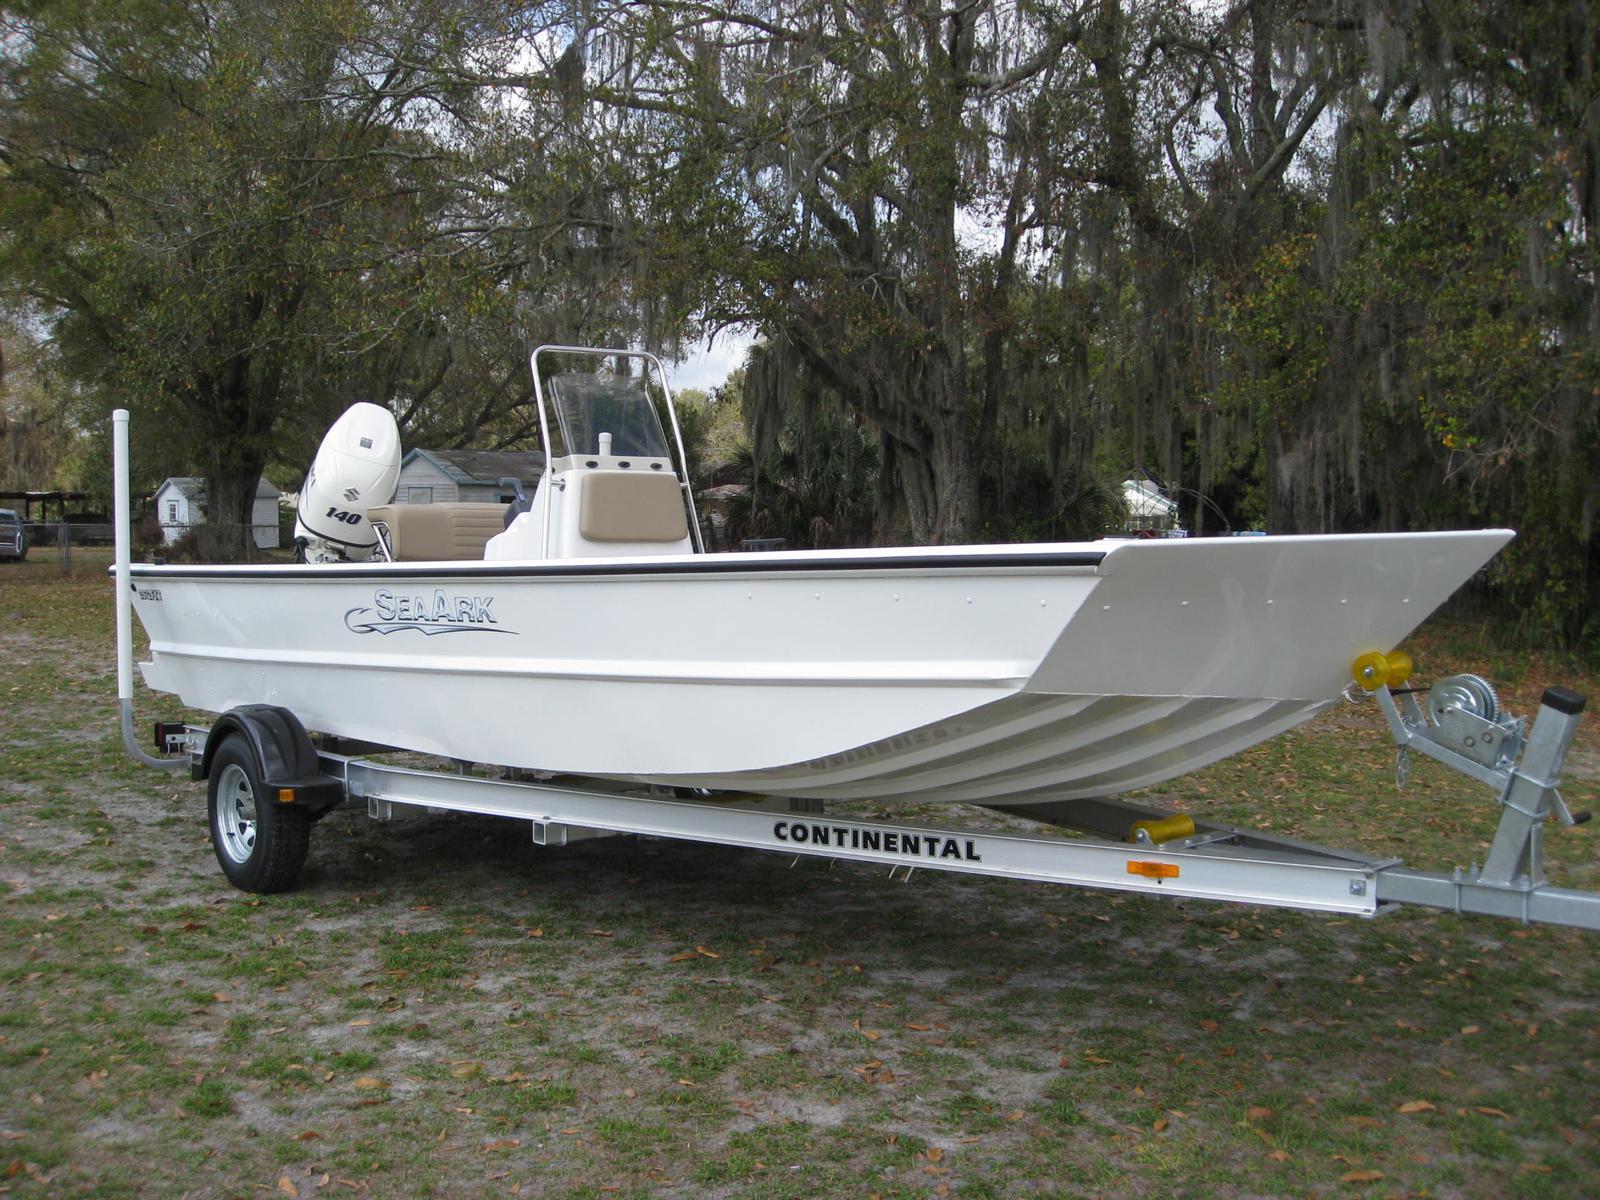 Seaark | New and Used Boats for Sale